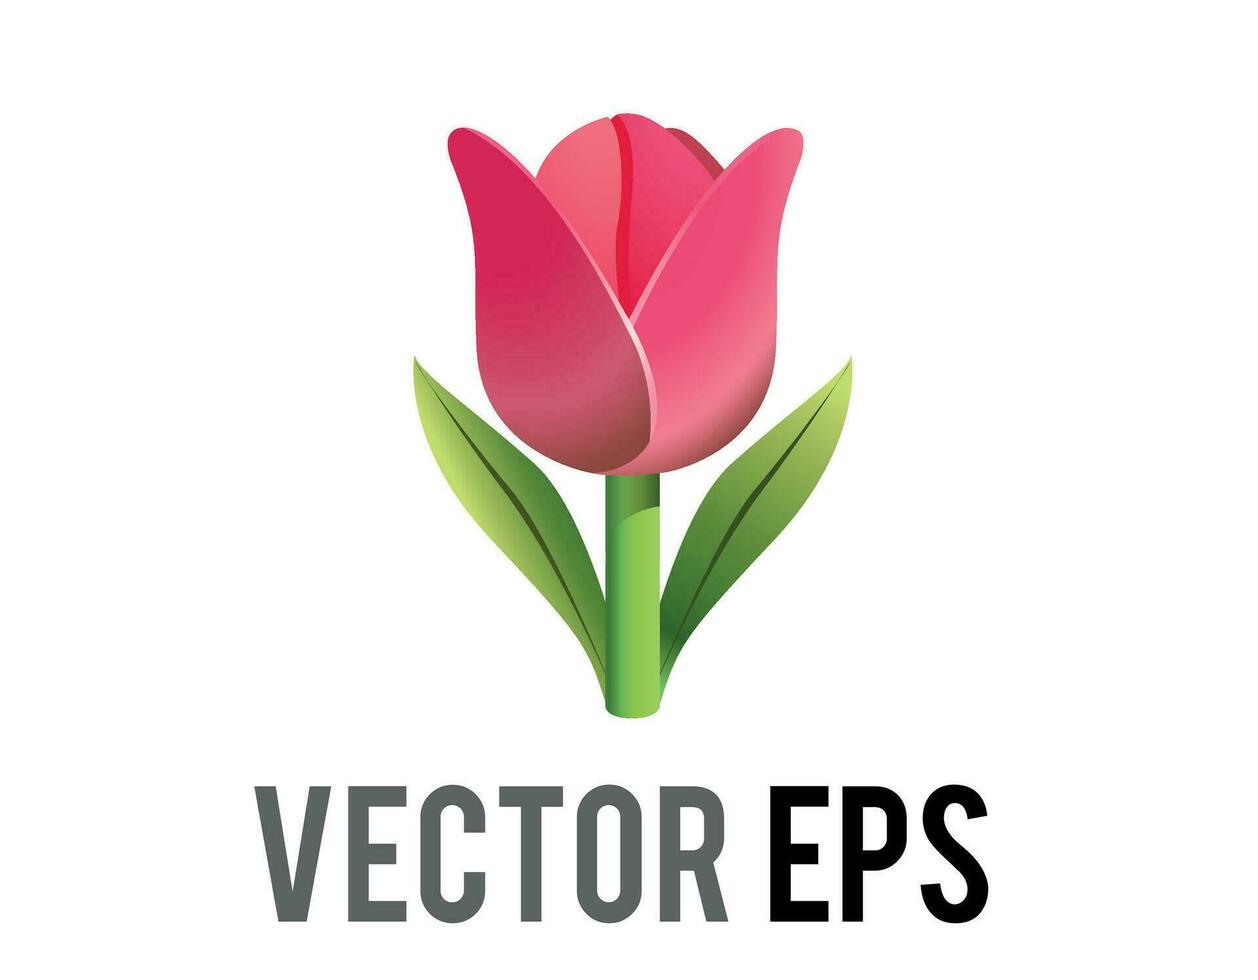 Vector pink tulip flower icon with green stem and leaves